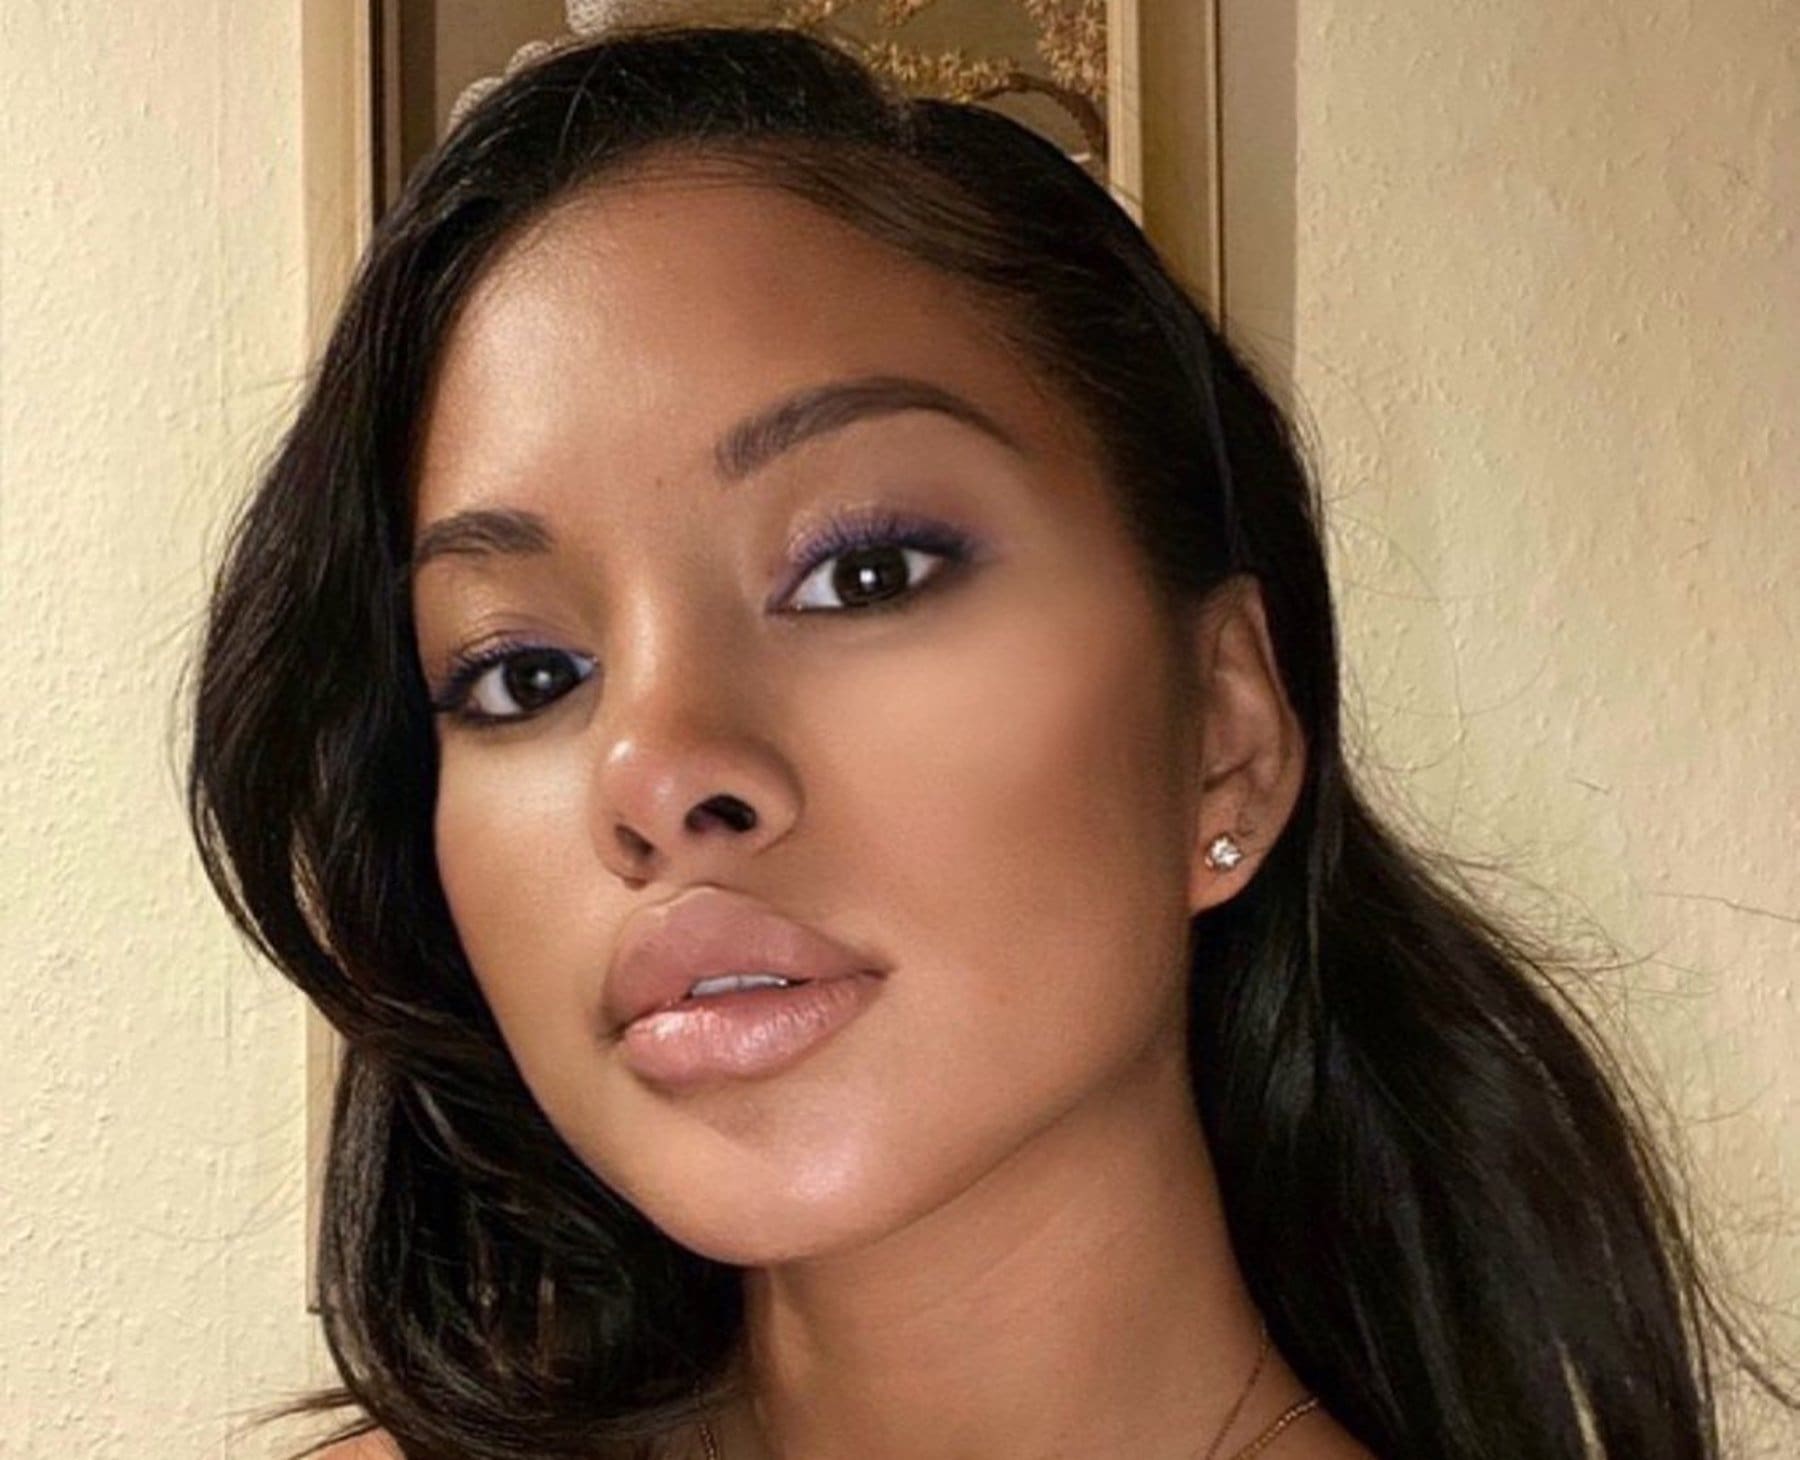 Chris Brown's Baby Mama, Ammika Harris Takes Fans To Heaven By Finally Posting Her Skincare Routine! Read Her Secrets To Looking Flawless